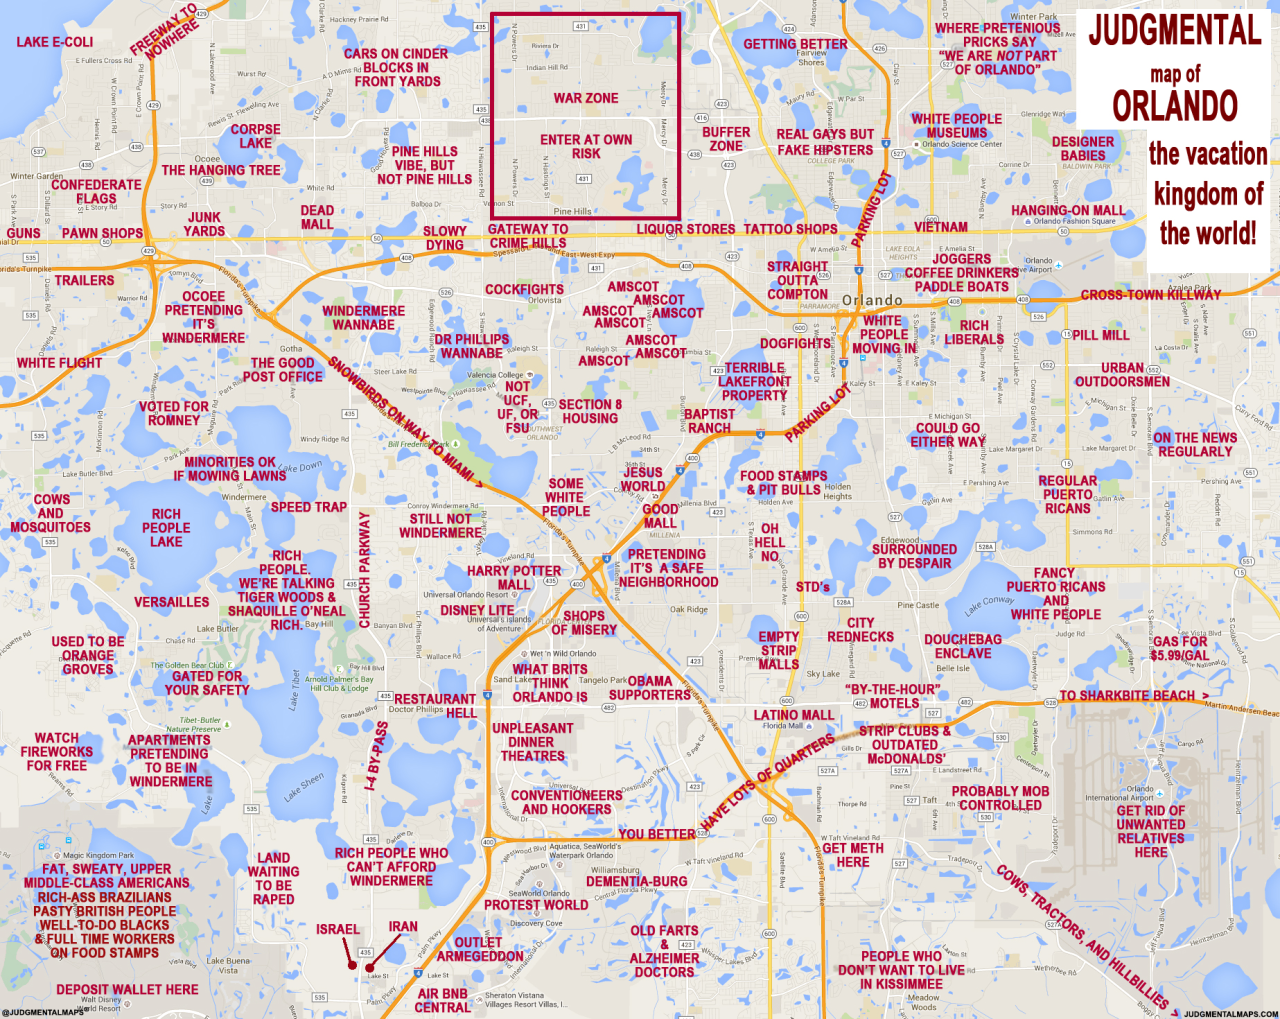 Judgmental Maps Takes On Orlando With Hilariously Offensive Results